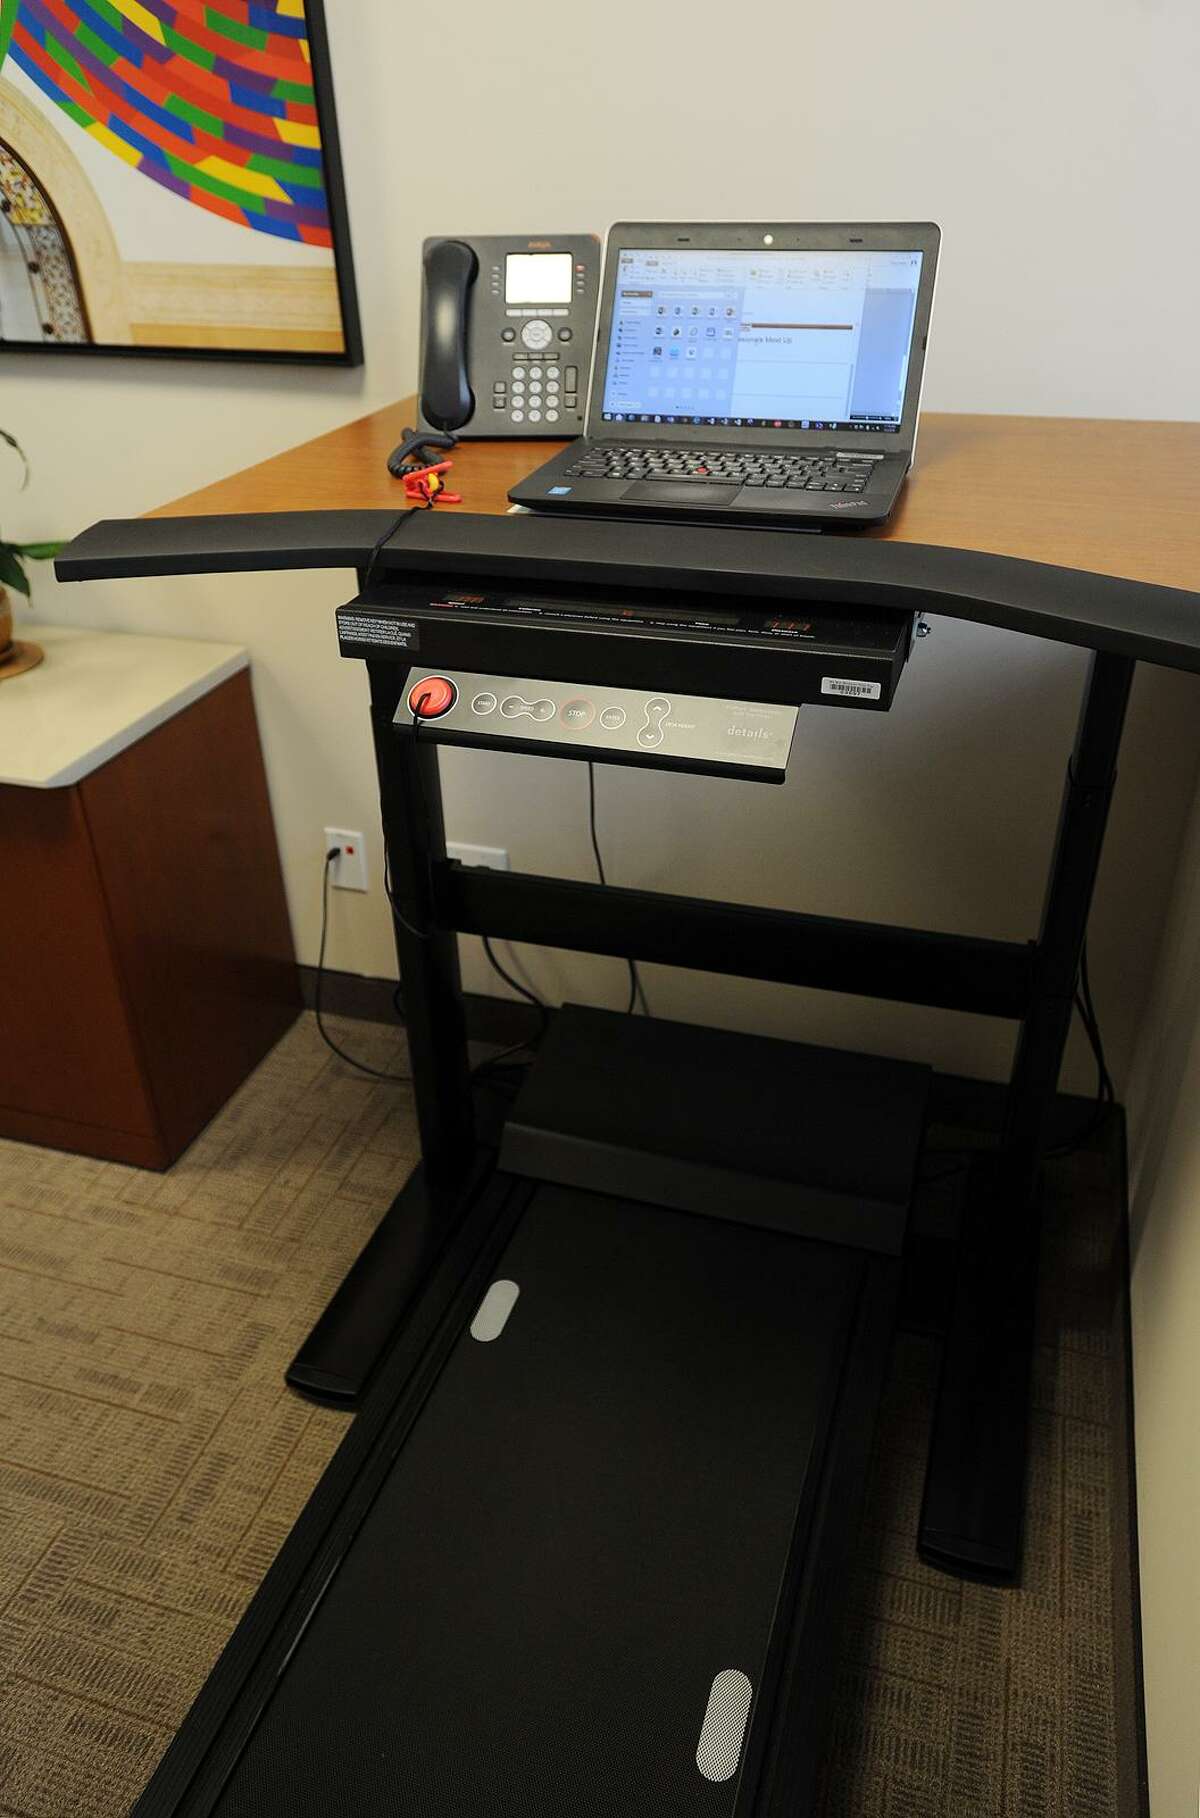 The Steelcase Walking Desk available for use by clients at Symphony Workplaces at 55 Greens Farms Road in Westport, Conn.